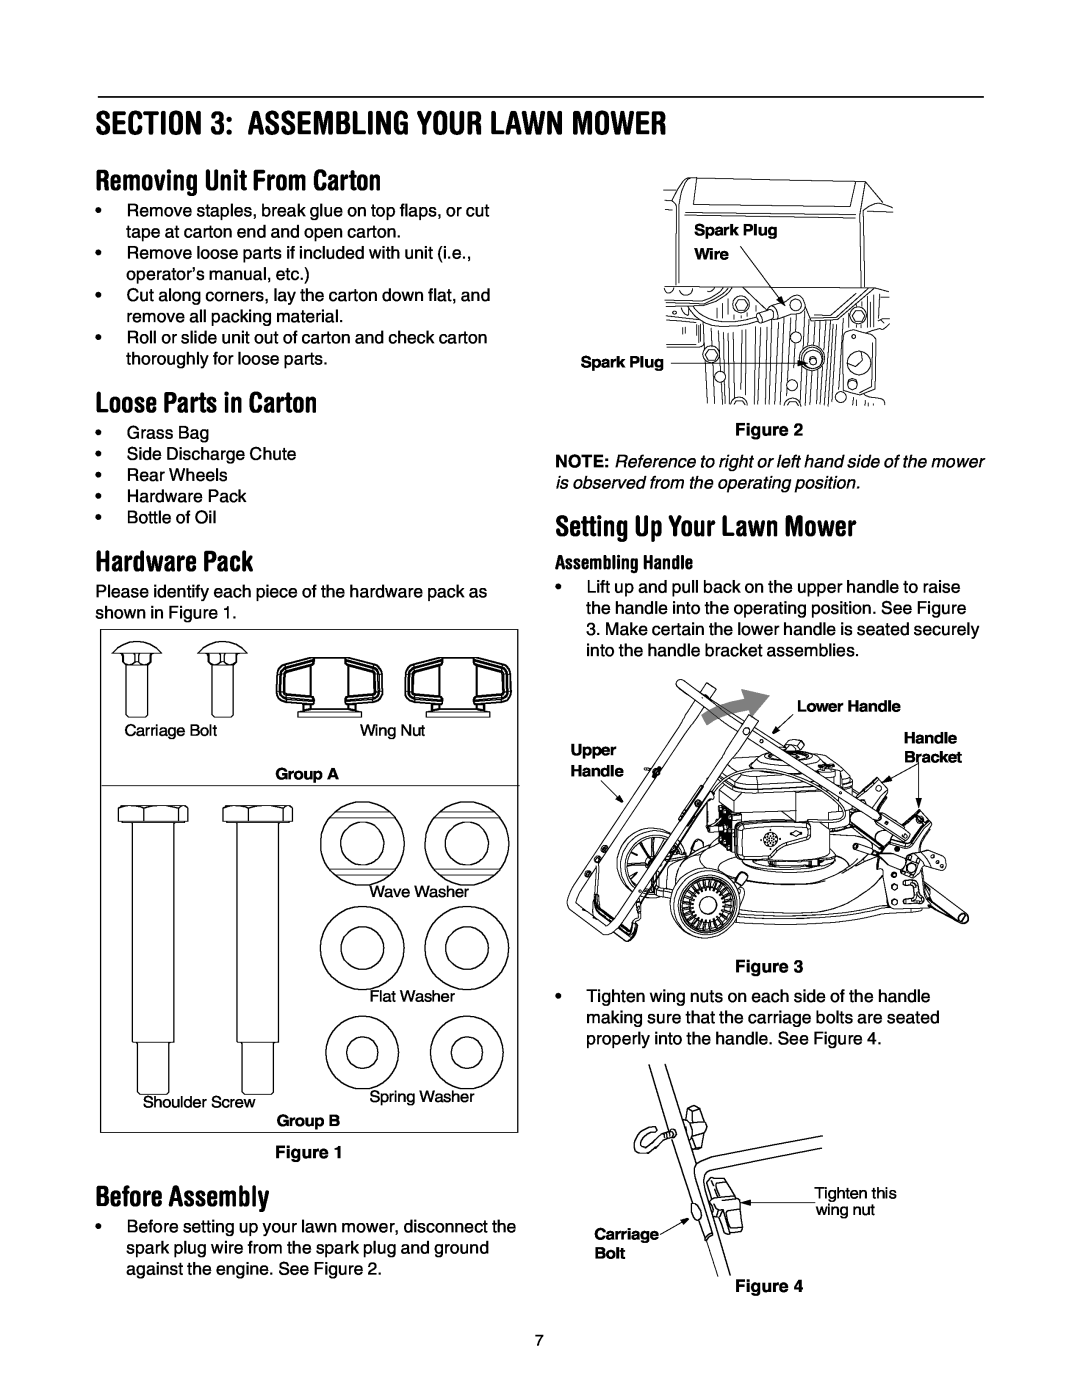 Bolens 544 Assembling Your Lawn Mower, Removing Unit From Carton, Loose Parts in Carton, Hardware Pack, Before Assembly 